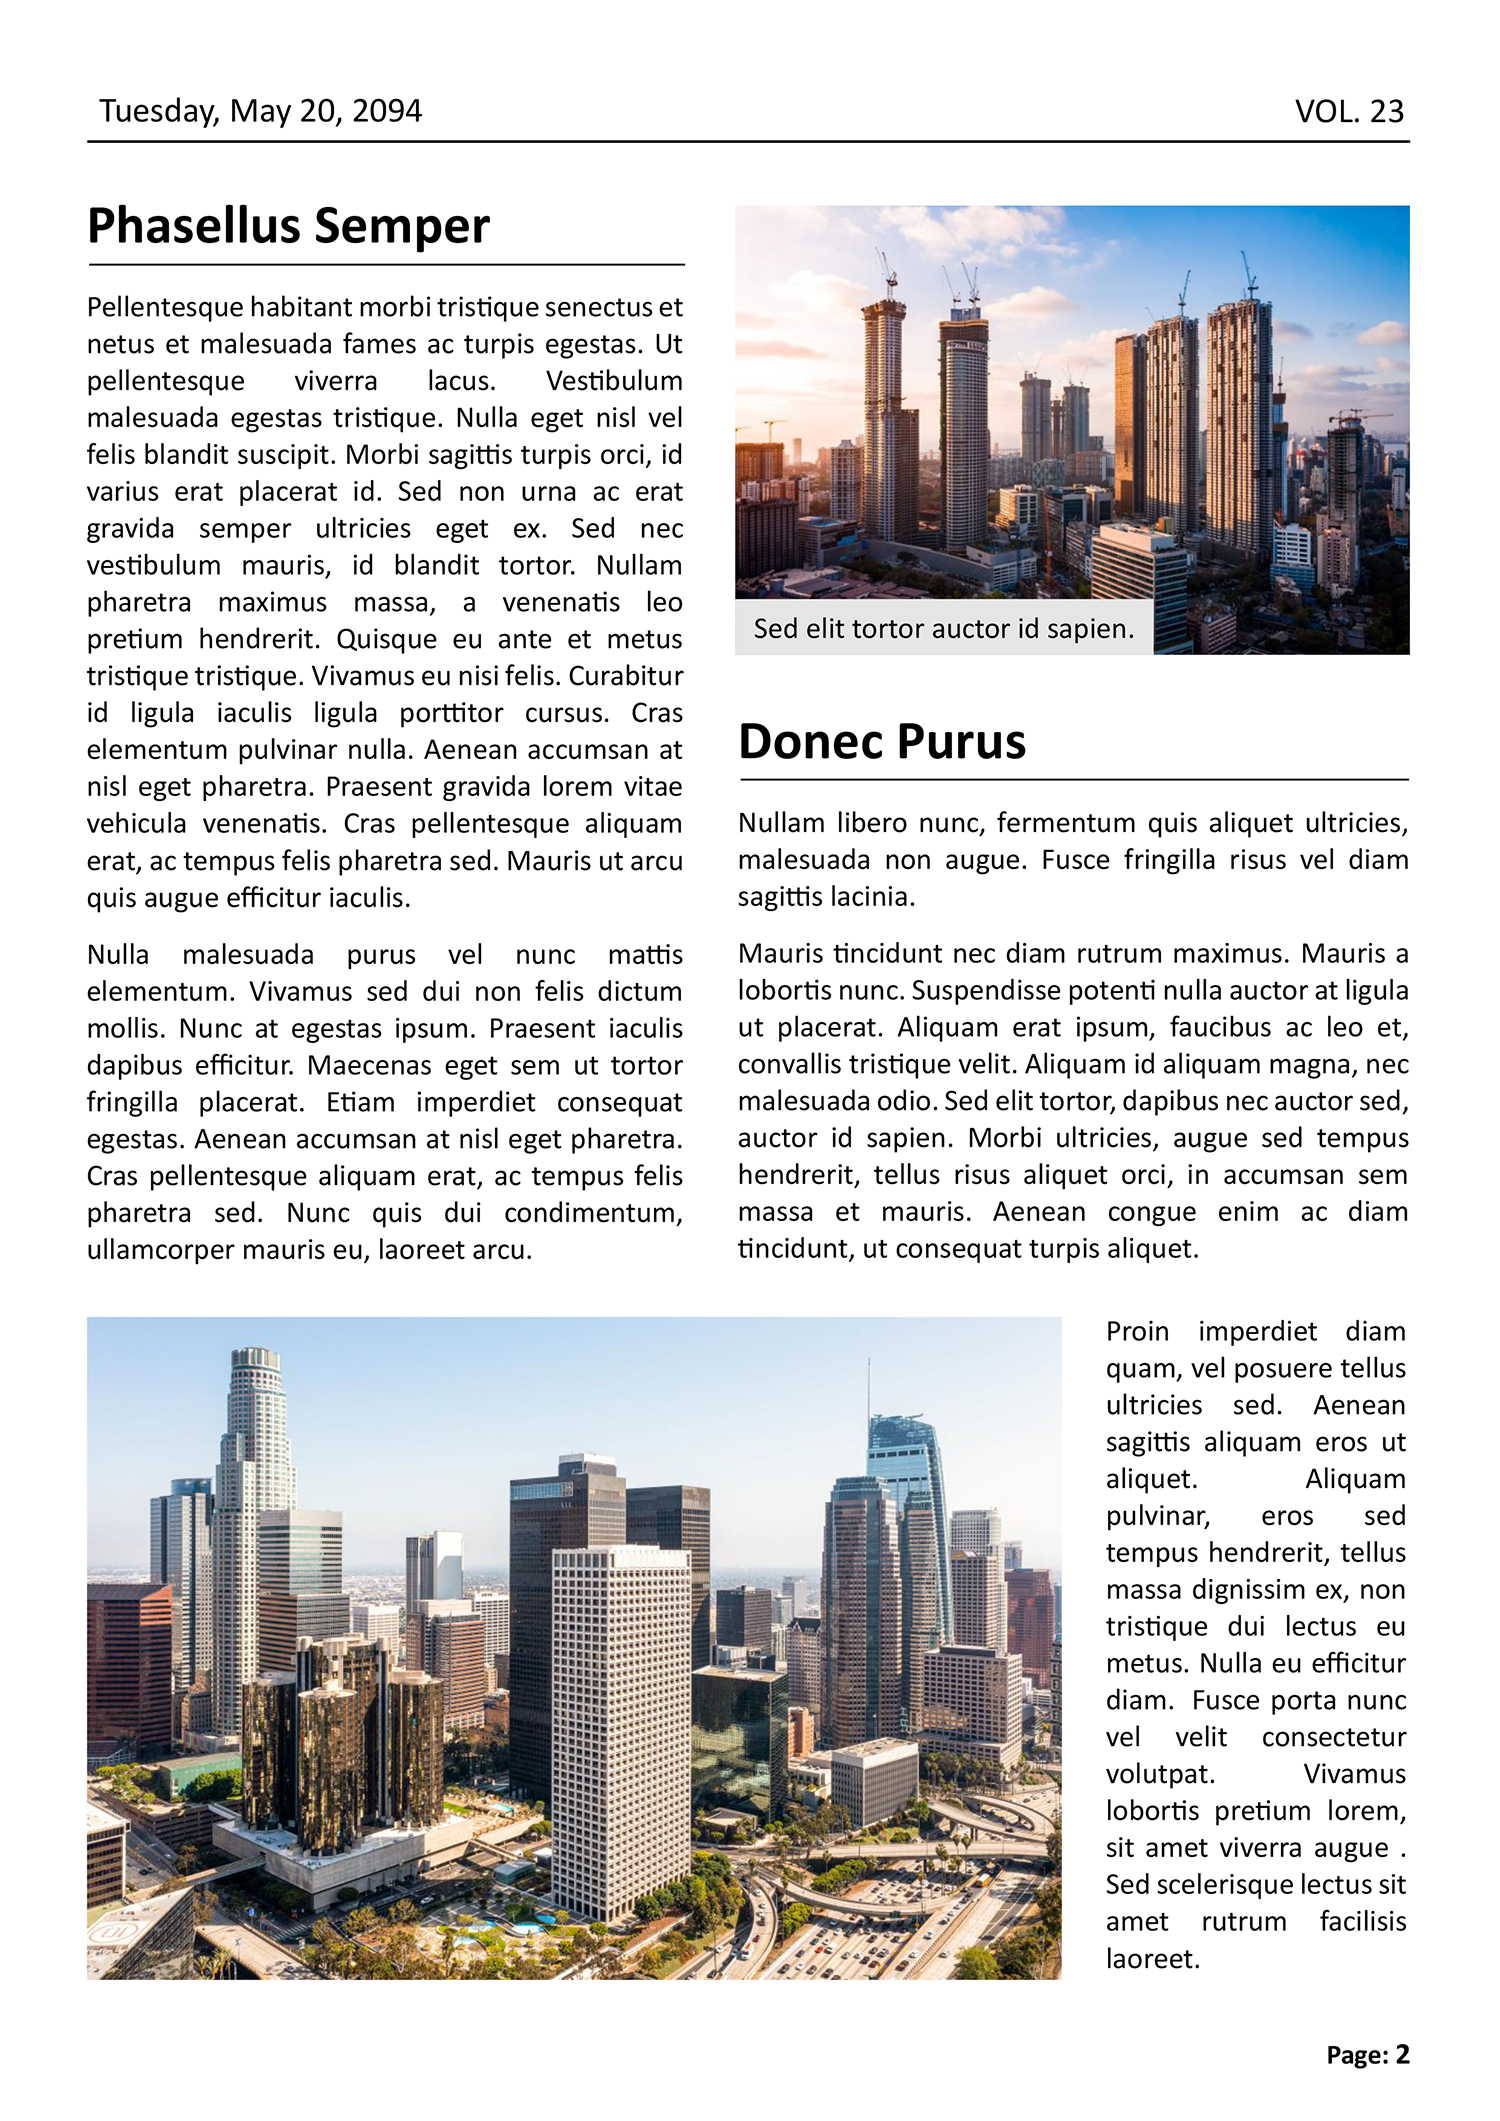 New York Times Newspaper Template - Page 02